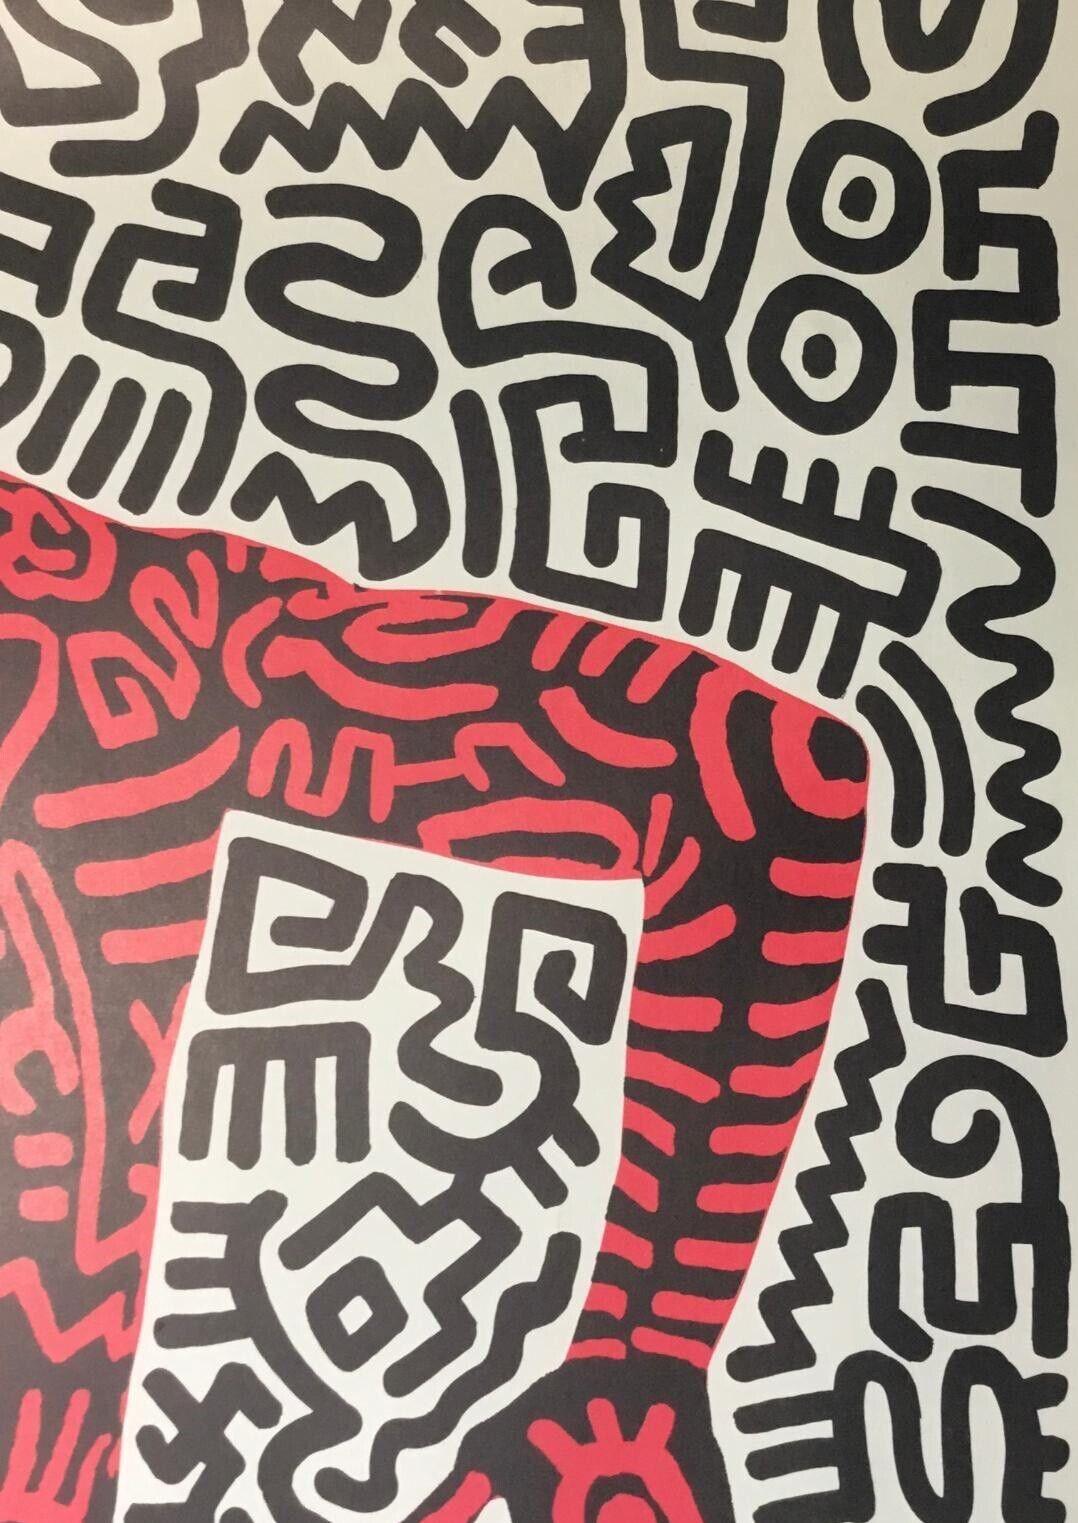 American Keith Haring Signed Lithograph Tony Shafrazi Gallery Exhibition Poster Into 84 For Sale